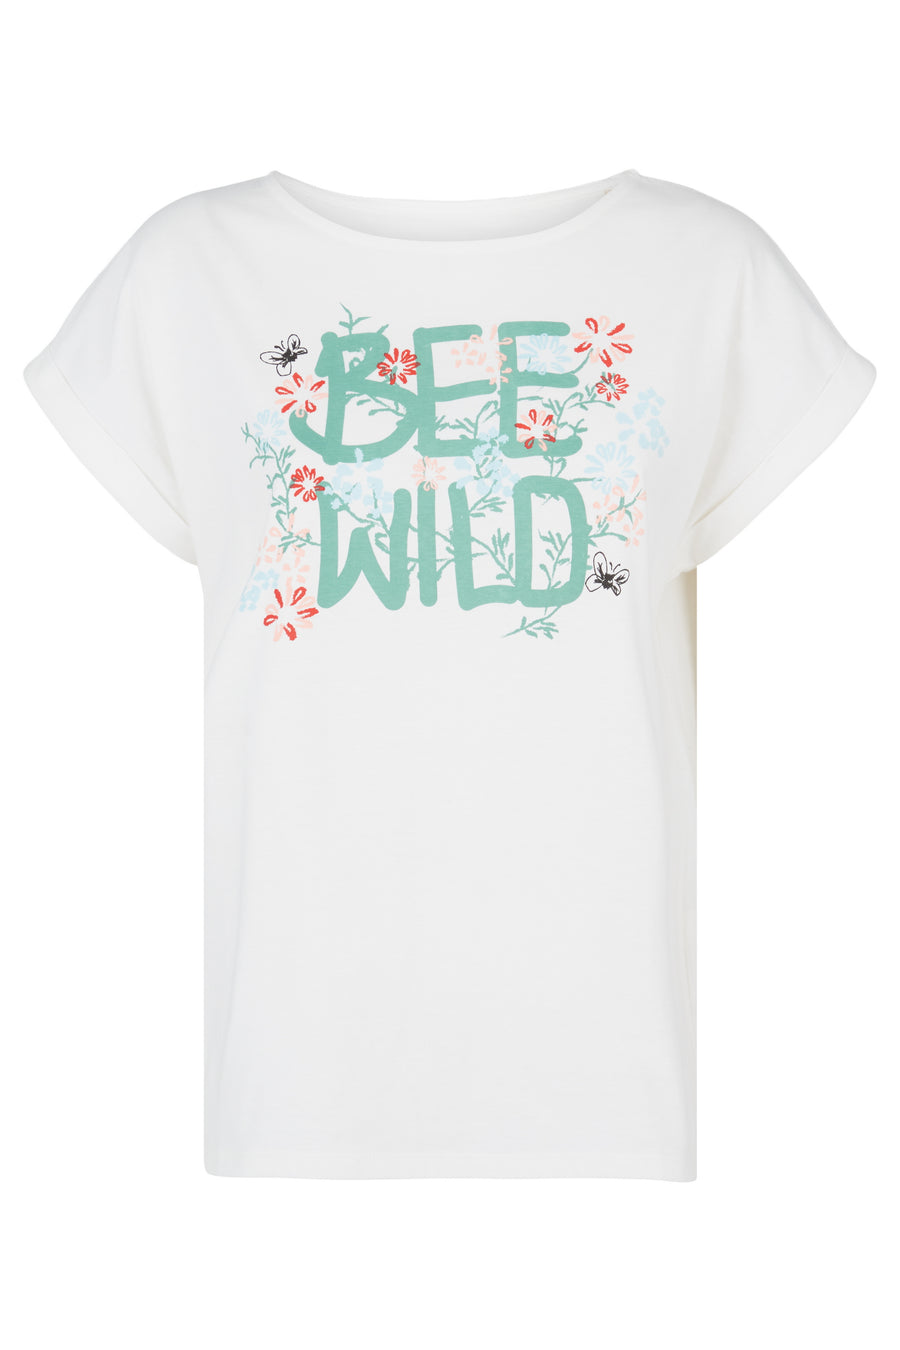 People Tree Fair Trade, Ethical & Sustainable Bee Wild Print Tee in Eco white 100% organic certified cotton